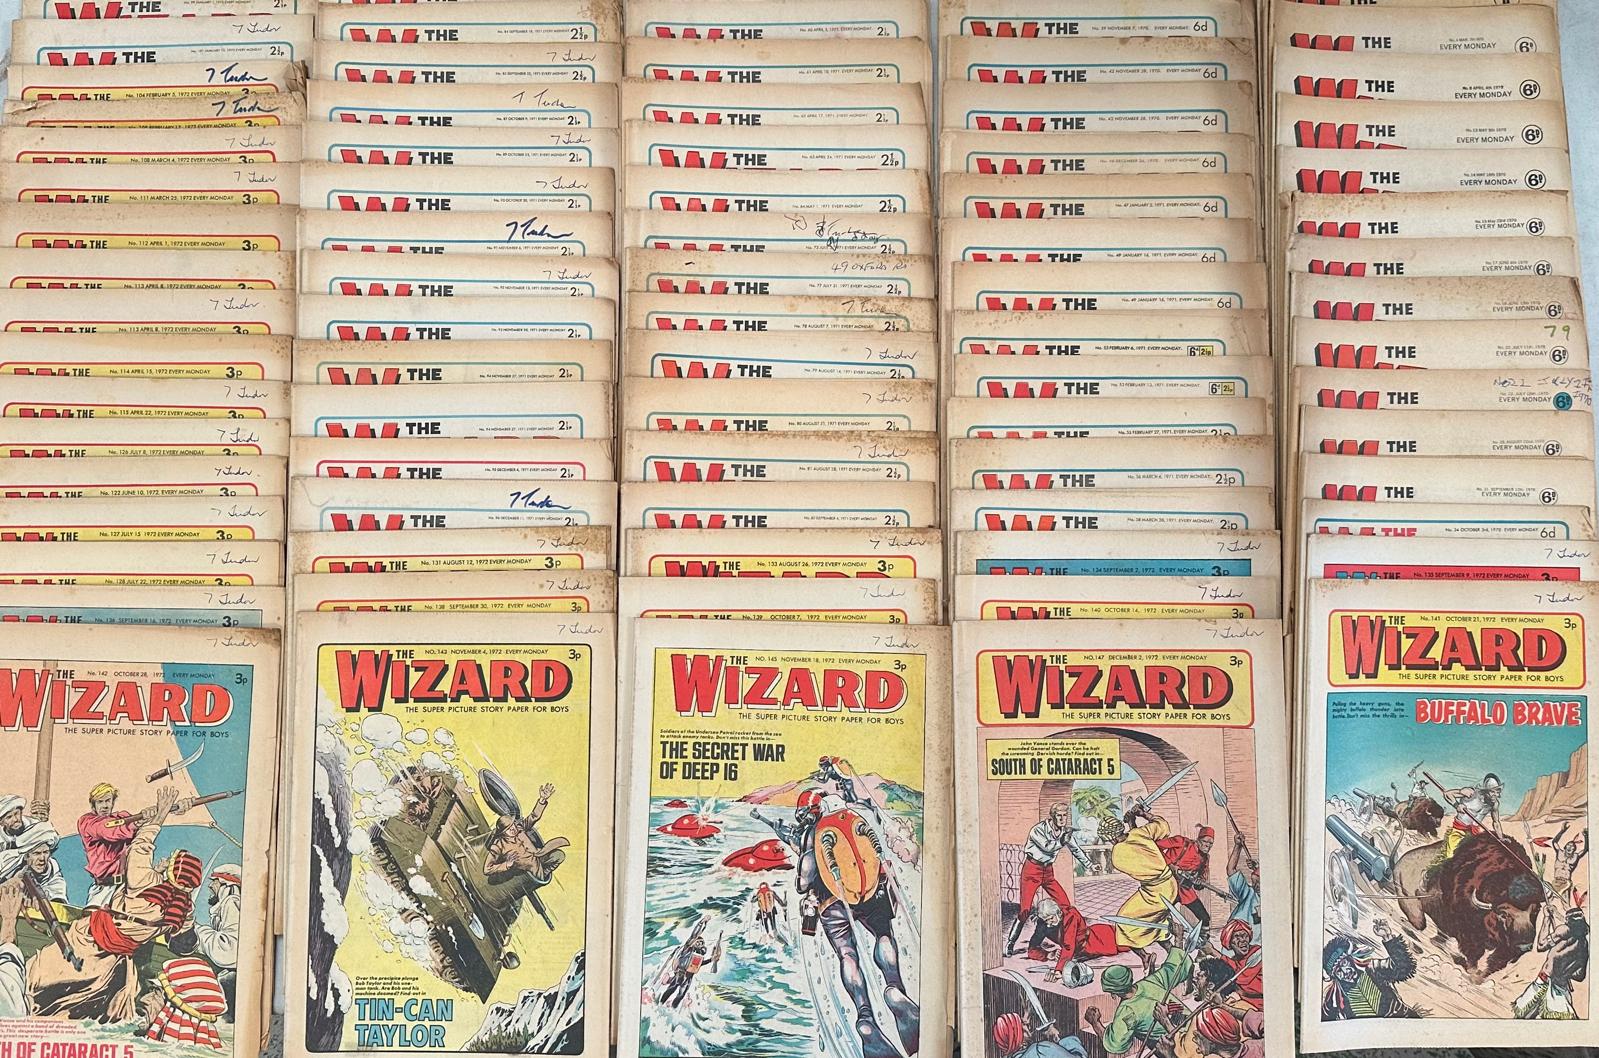 A collection of vintage The Wizard comics including issue 1 and 2